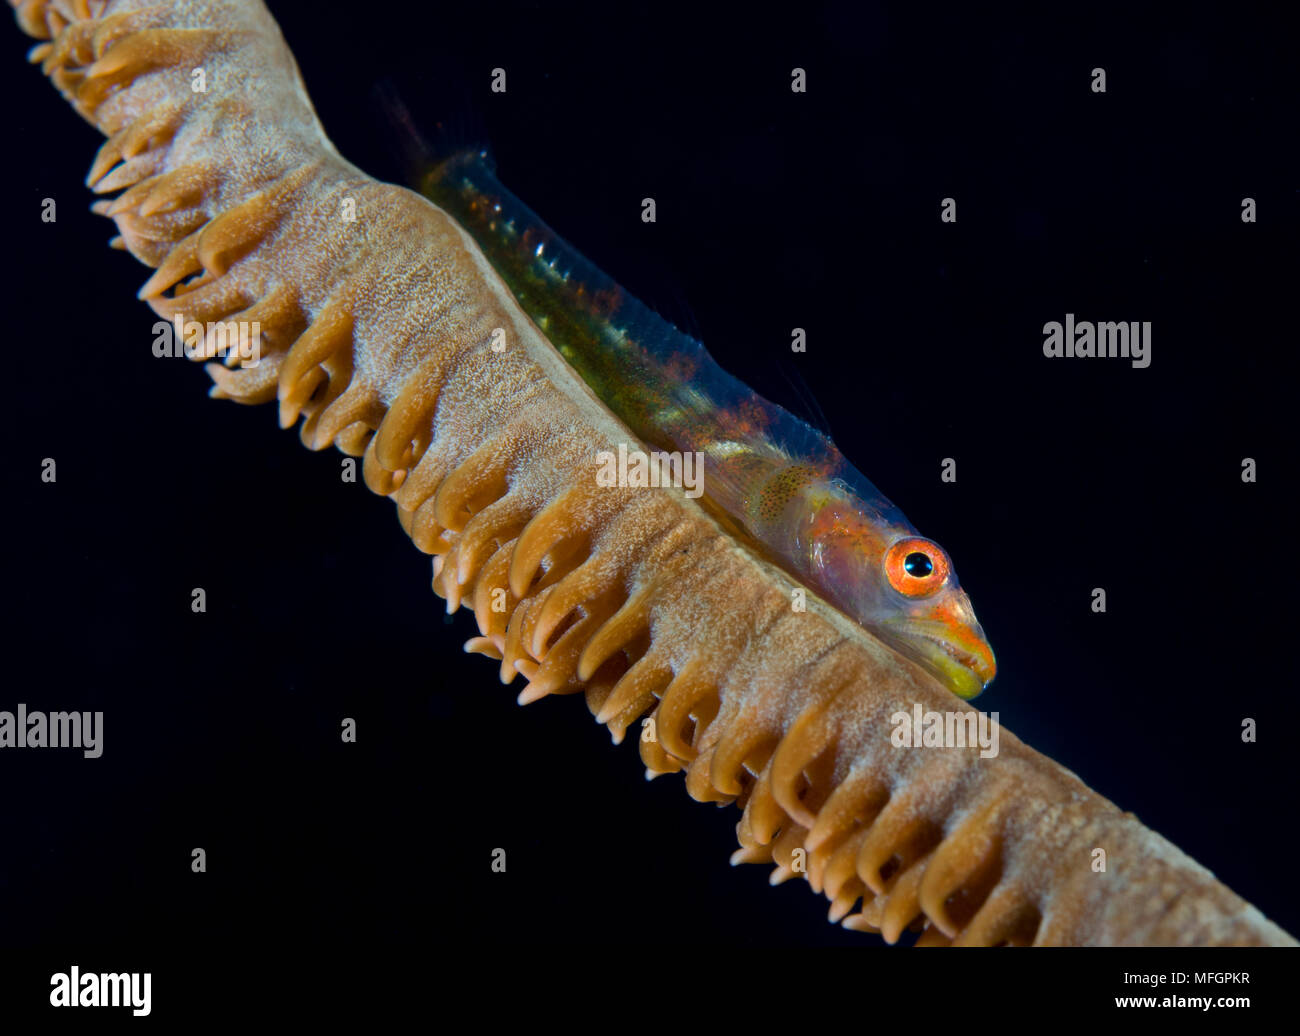 whip-coral goby (Bryaninops yongei) on common wire coral (Cirrhipathes anguina), Solomon Islands Stock Photo